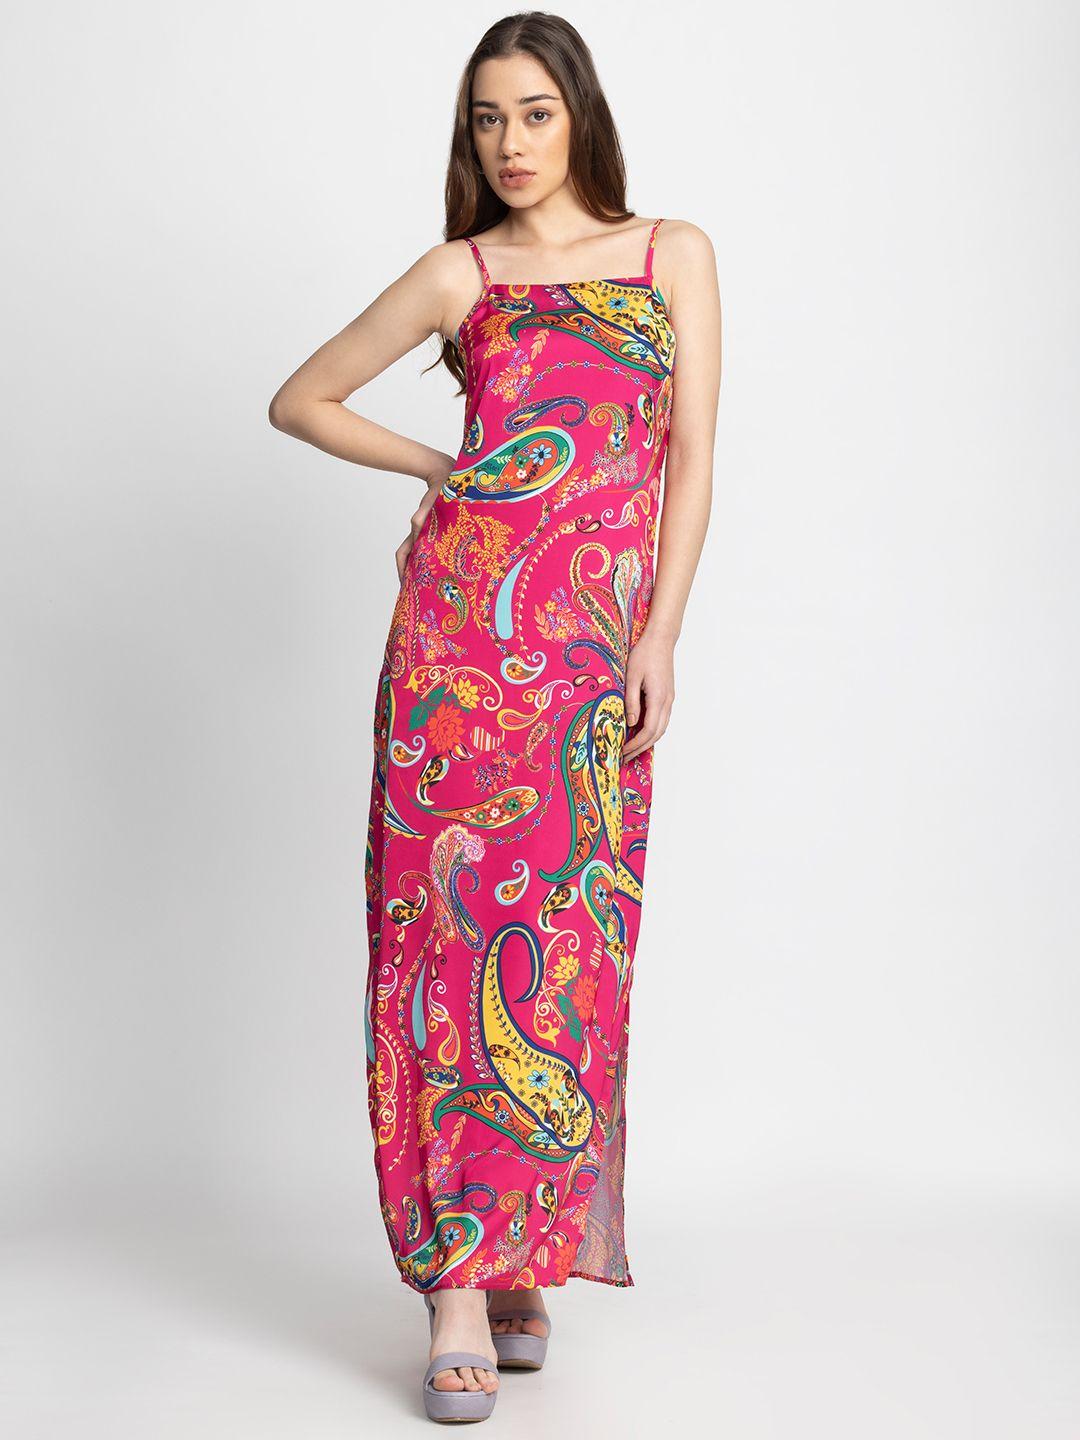 shaye square neck floral printed sleeveless party dress